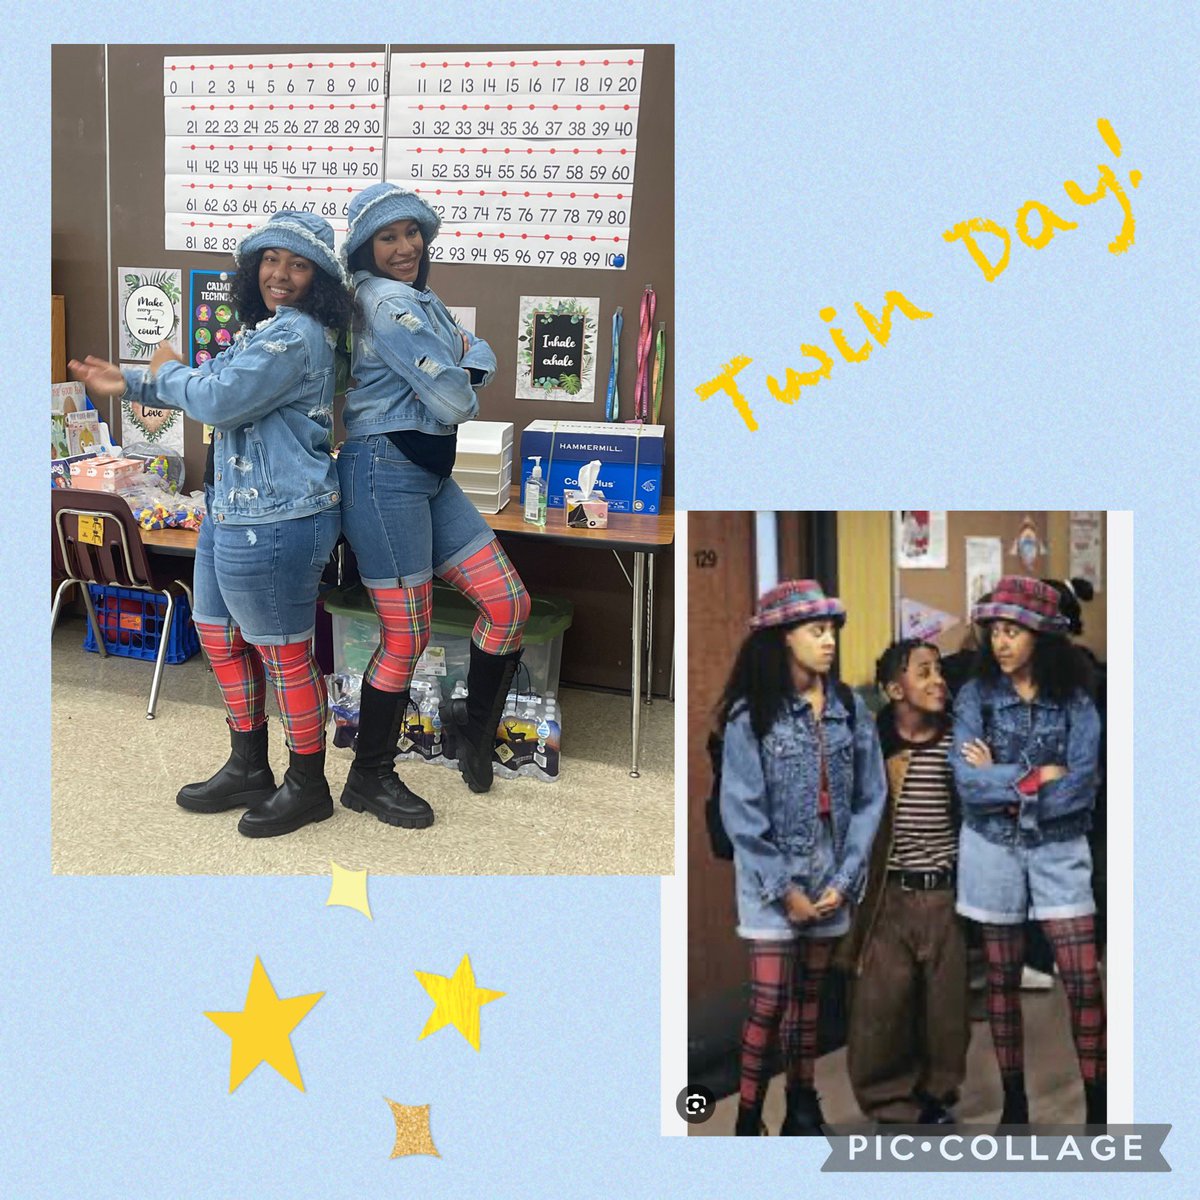 Read Across America Spirit Week: Twin Day! It was ‘Girl Power’ & friendship in full effect as students & staff paired up for a day of matching fun! The gold star goes to the teachers, Mrs. Fitchett & Ms. Canty, for their ‘Sister, Sister, inspired outfits! @SharelleStagg @TiaMowry